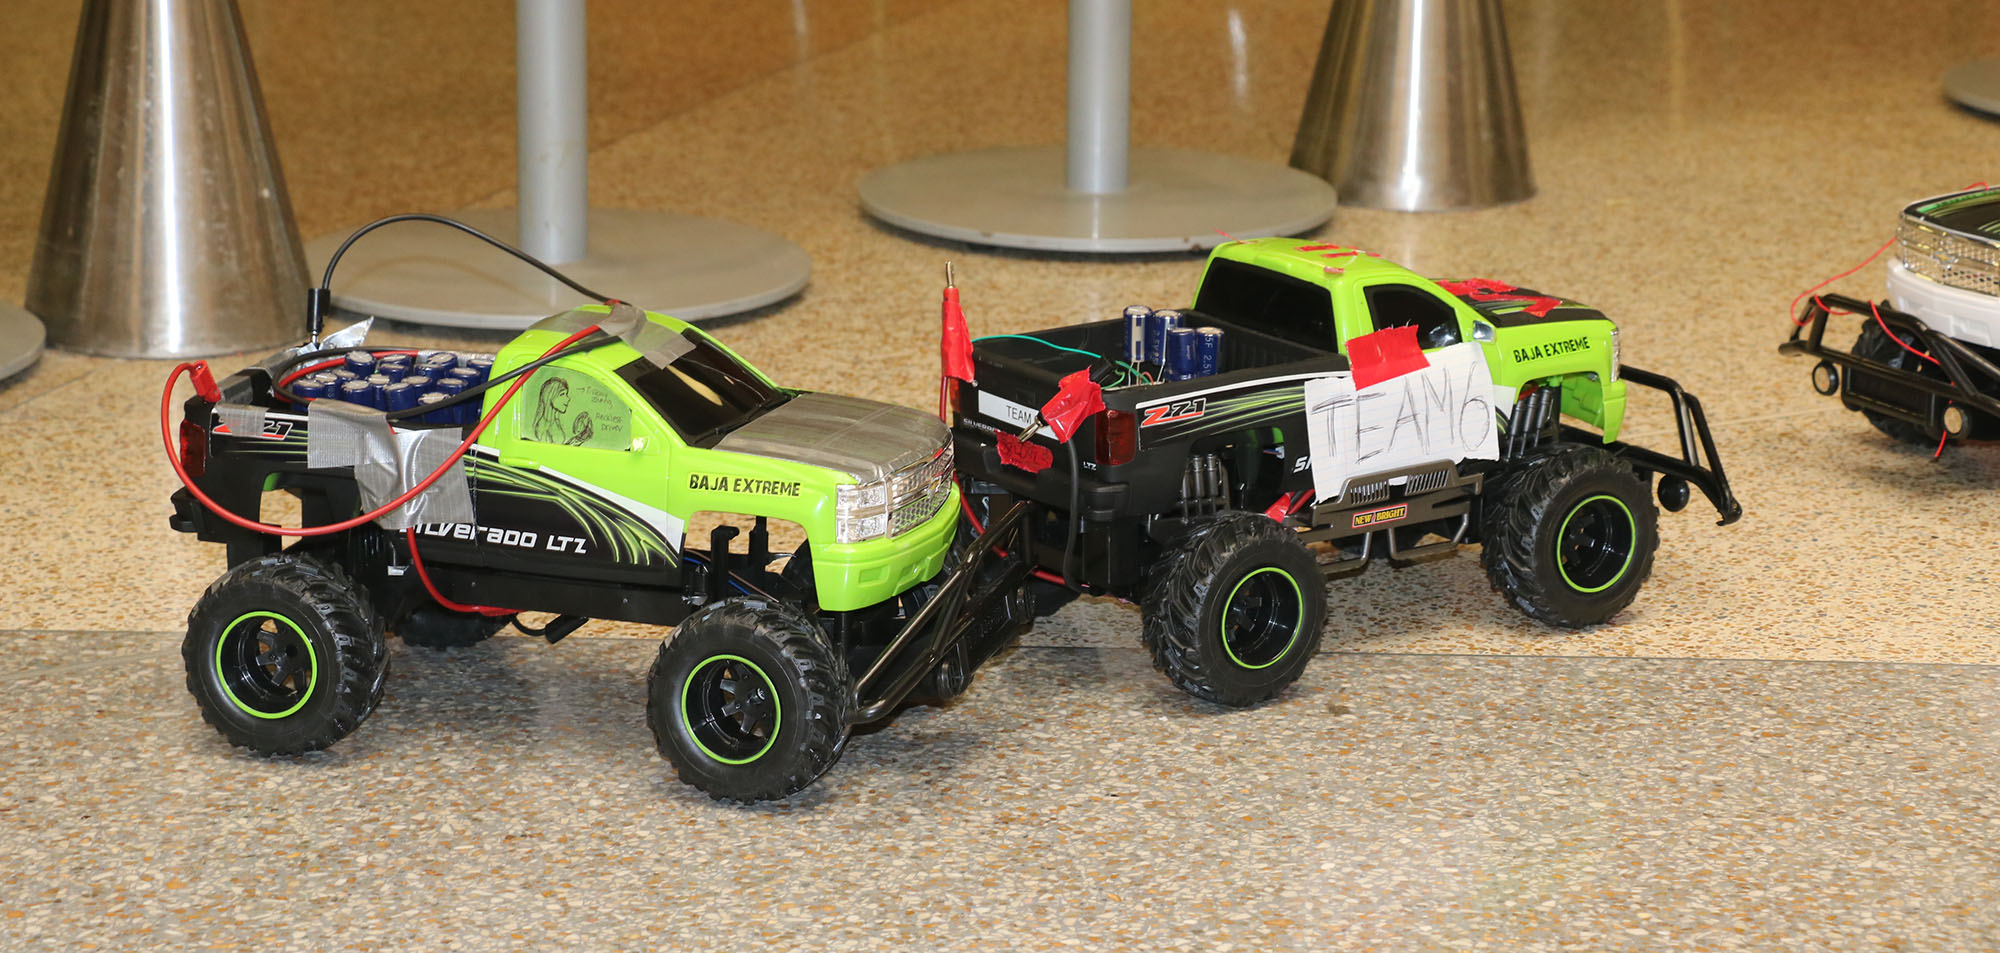 2 cars from the powerup teams